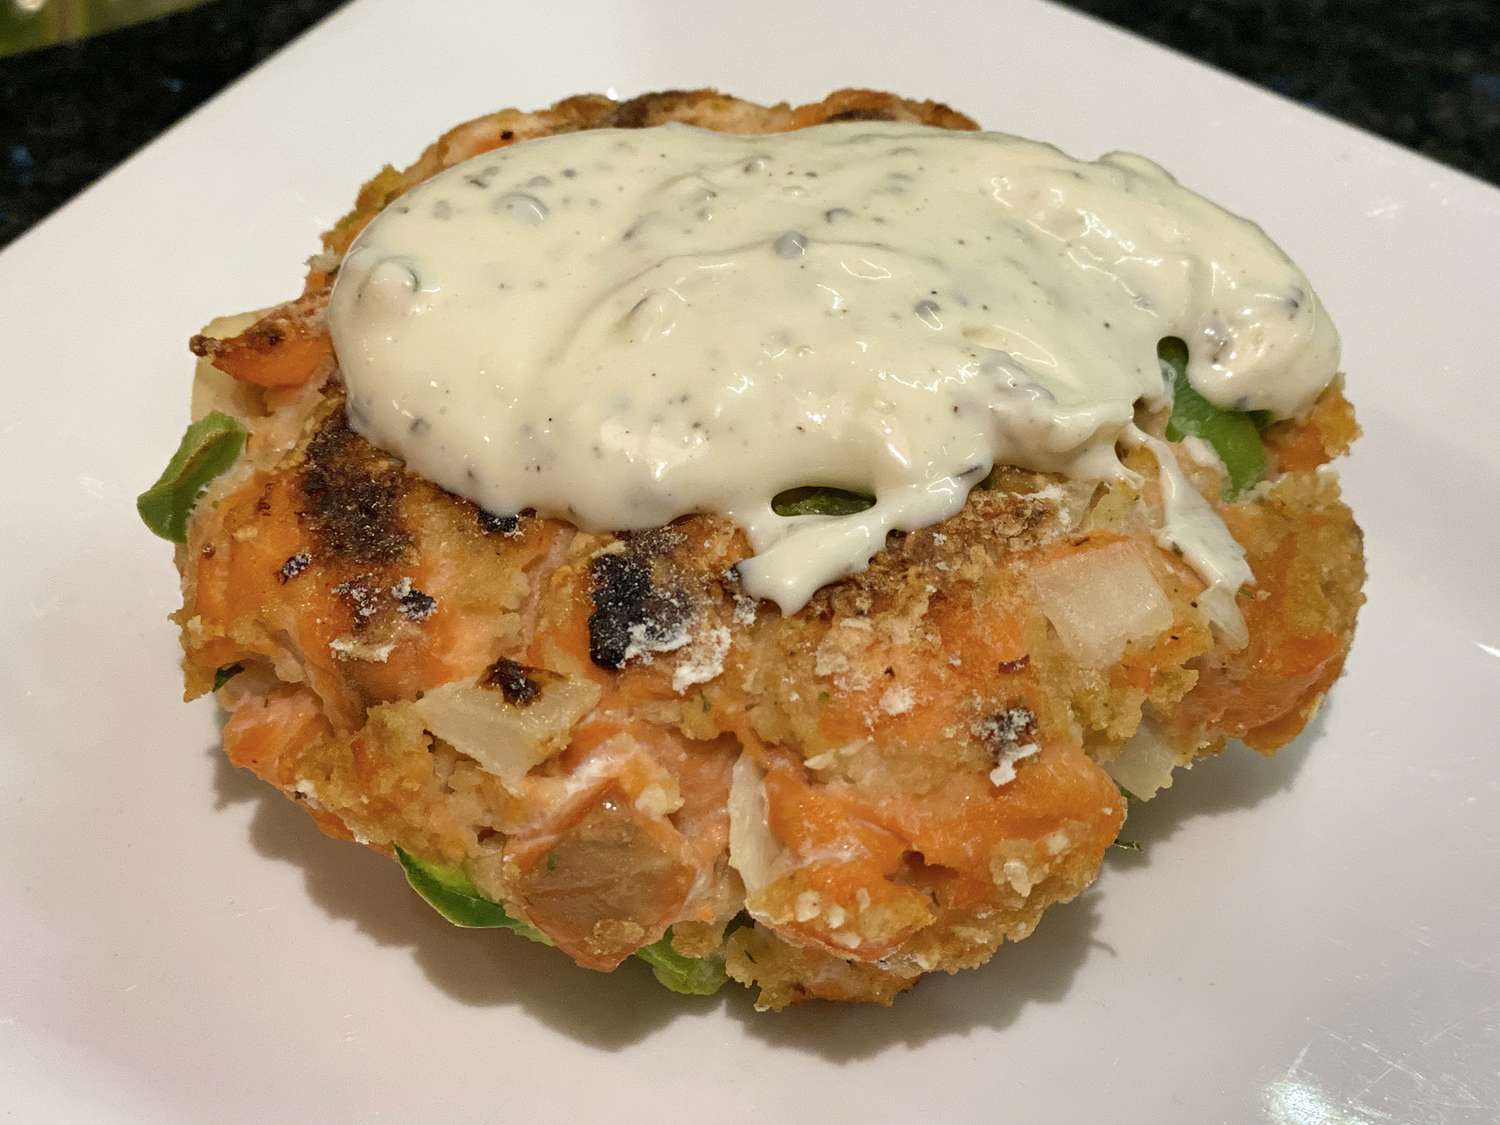 close up view of a Salmon Burger with Lemon Basil Mayo on a white plate